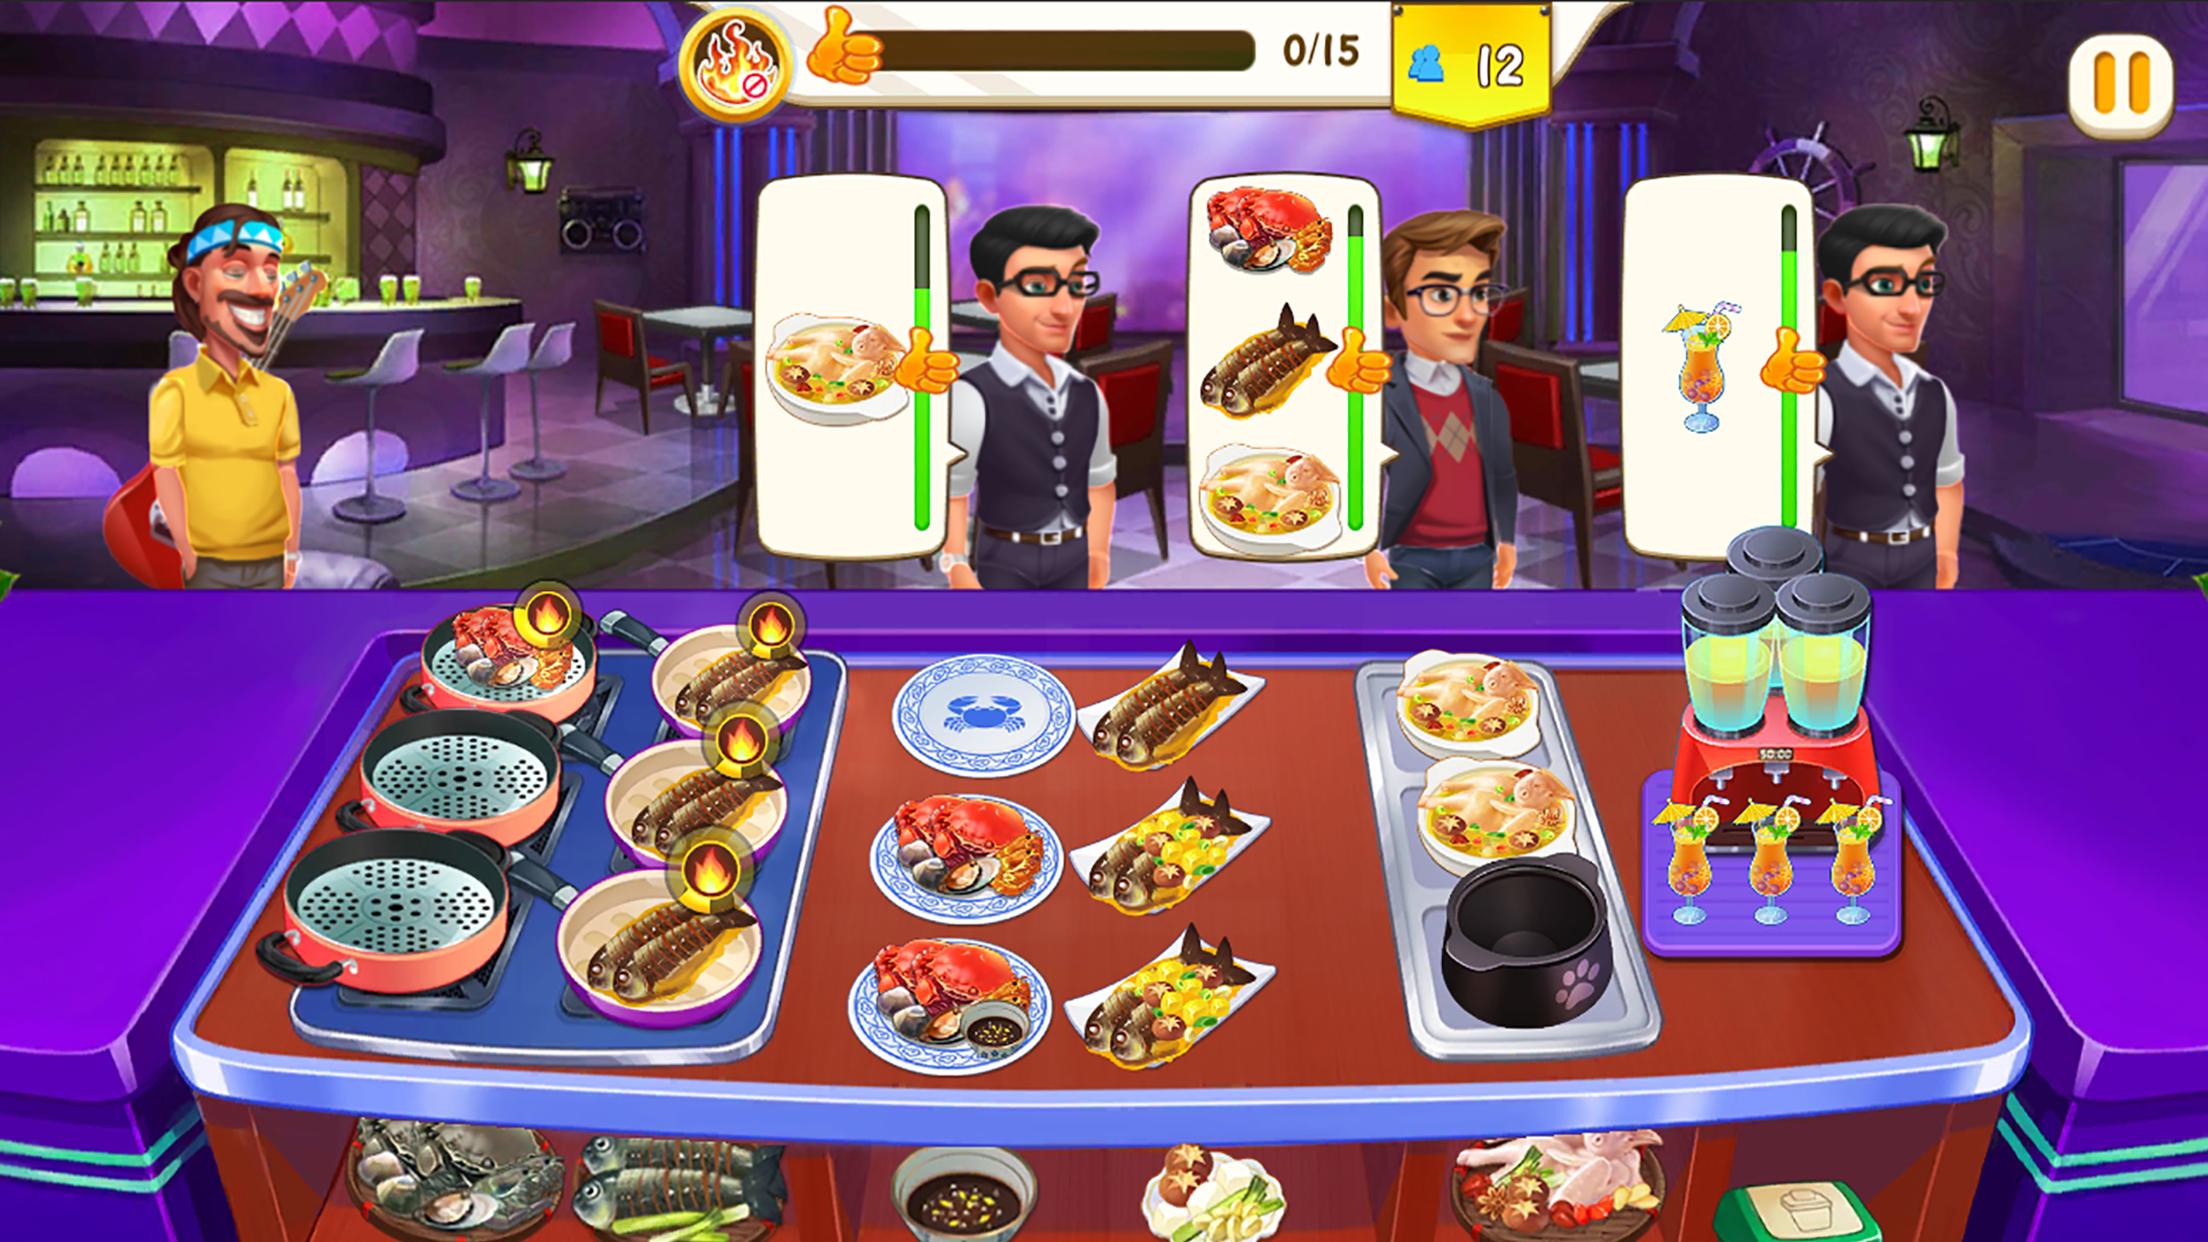 Cooking Rush Bake it to delicious 2.1.2 Screenshot 5